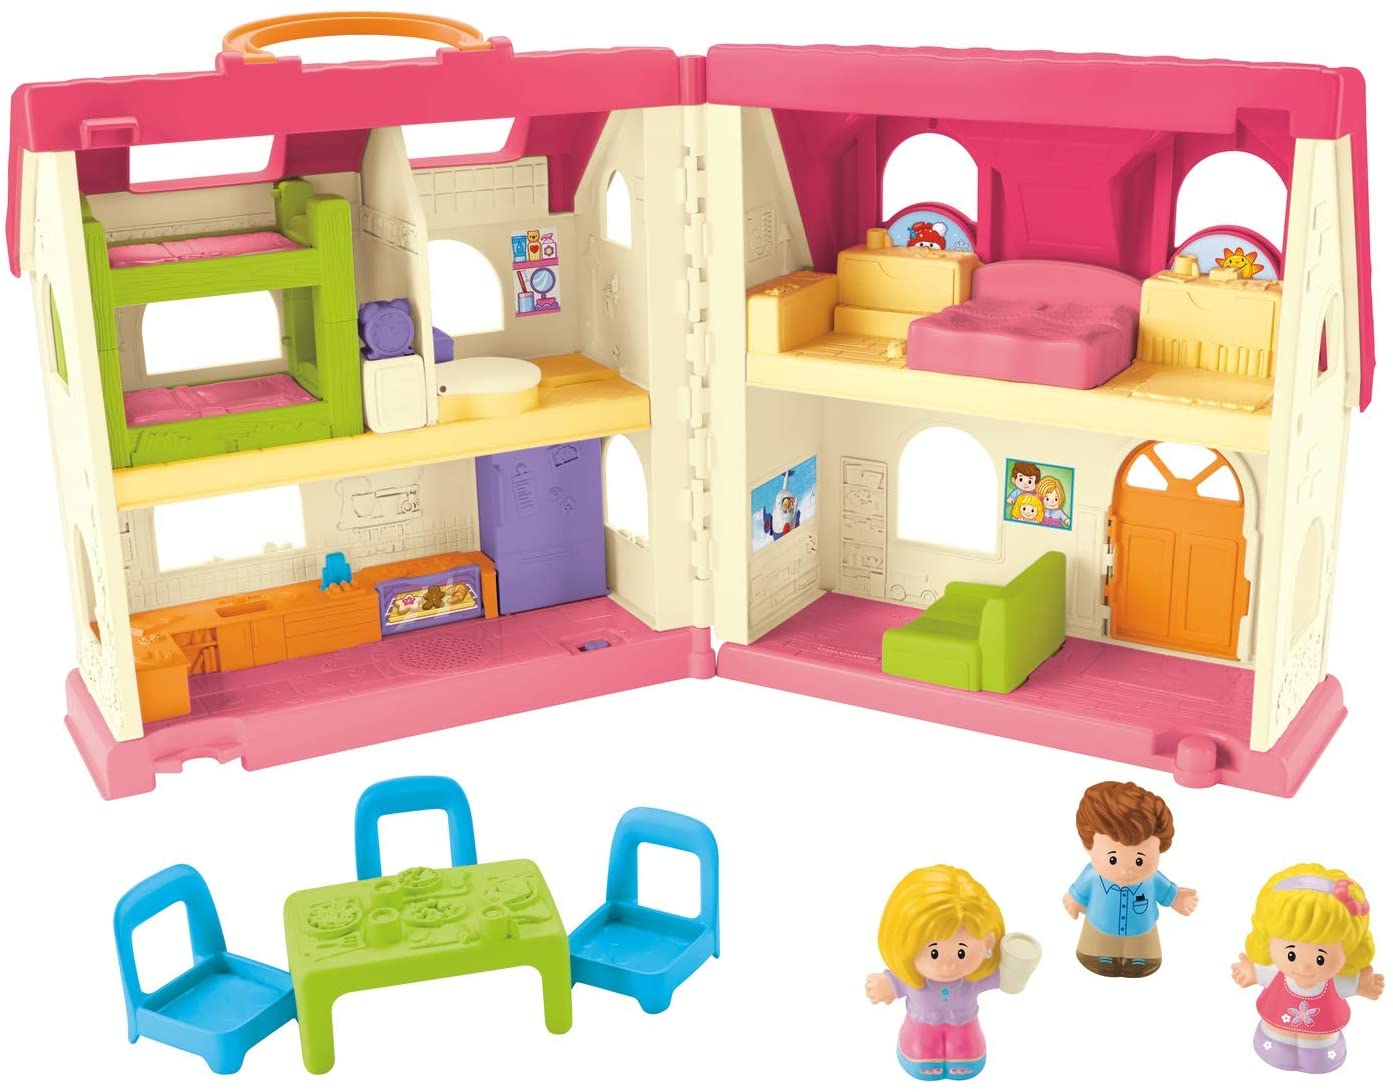 9 Best Fisher Price Dollhouse Reviews of 2023 2